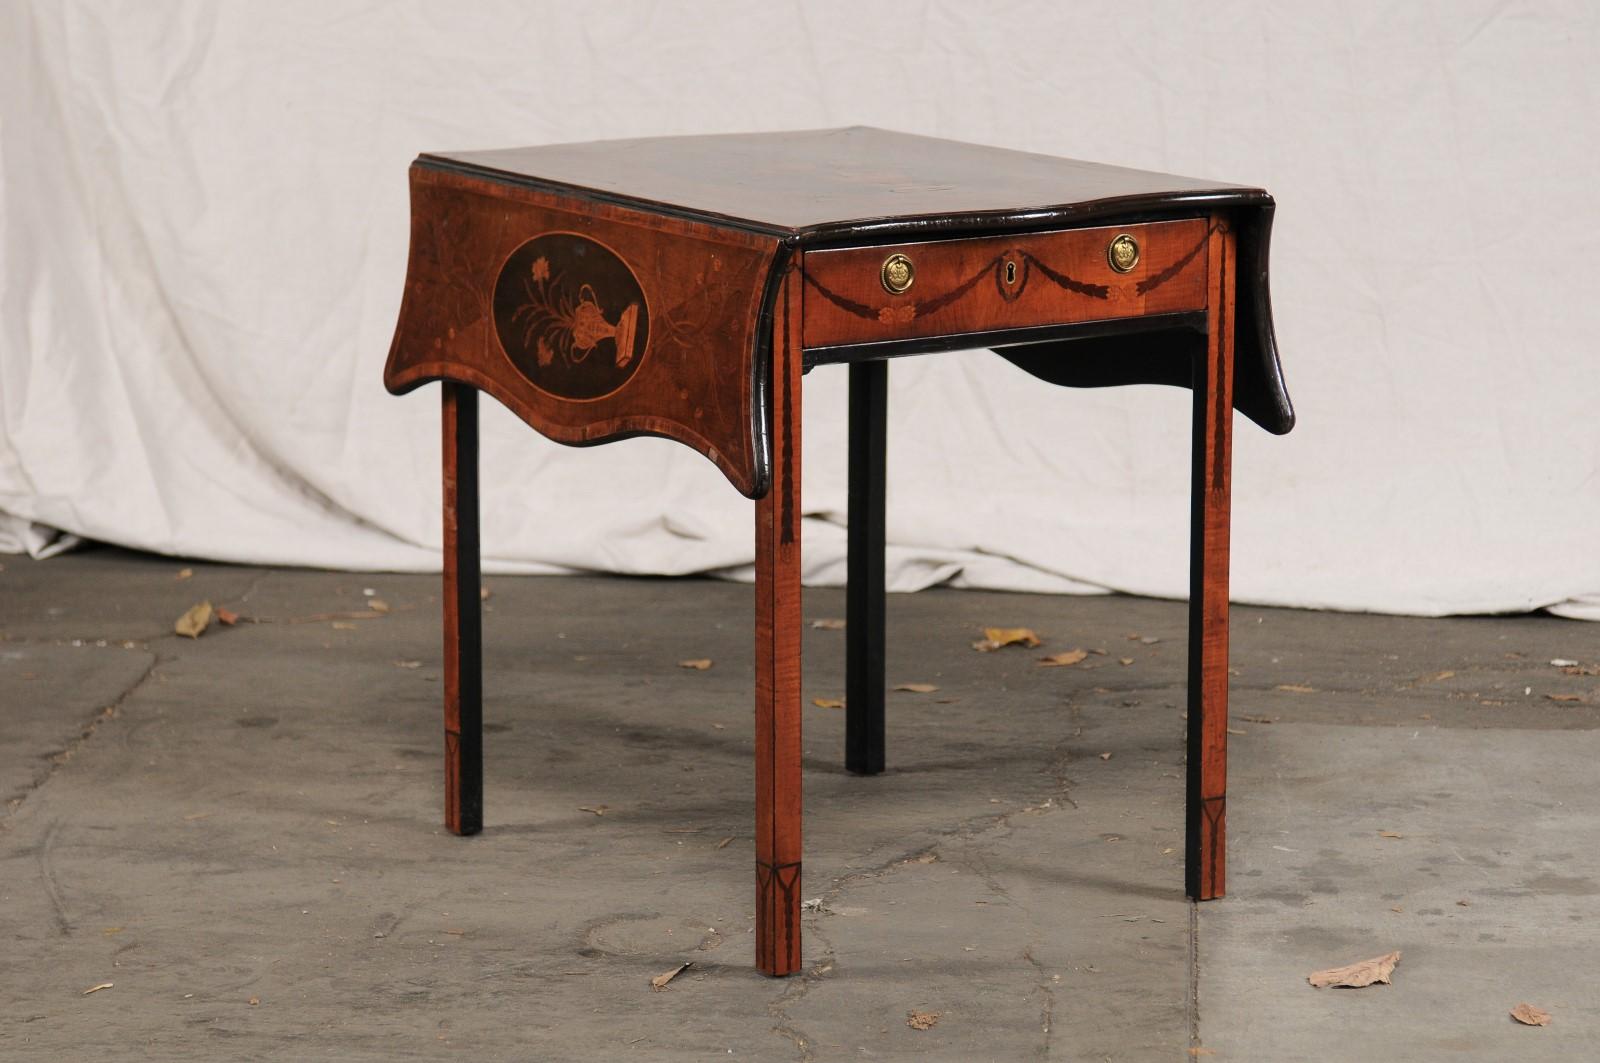 18th-19th century English George III mahogany inlaid pembroke table, Prince of Wales Feather Hardware, attributed to Mayhew & Ince.
Sycamore, tulipwood marquetry, ebonized
Measures: 38.5